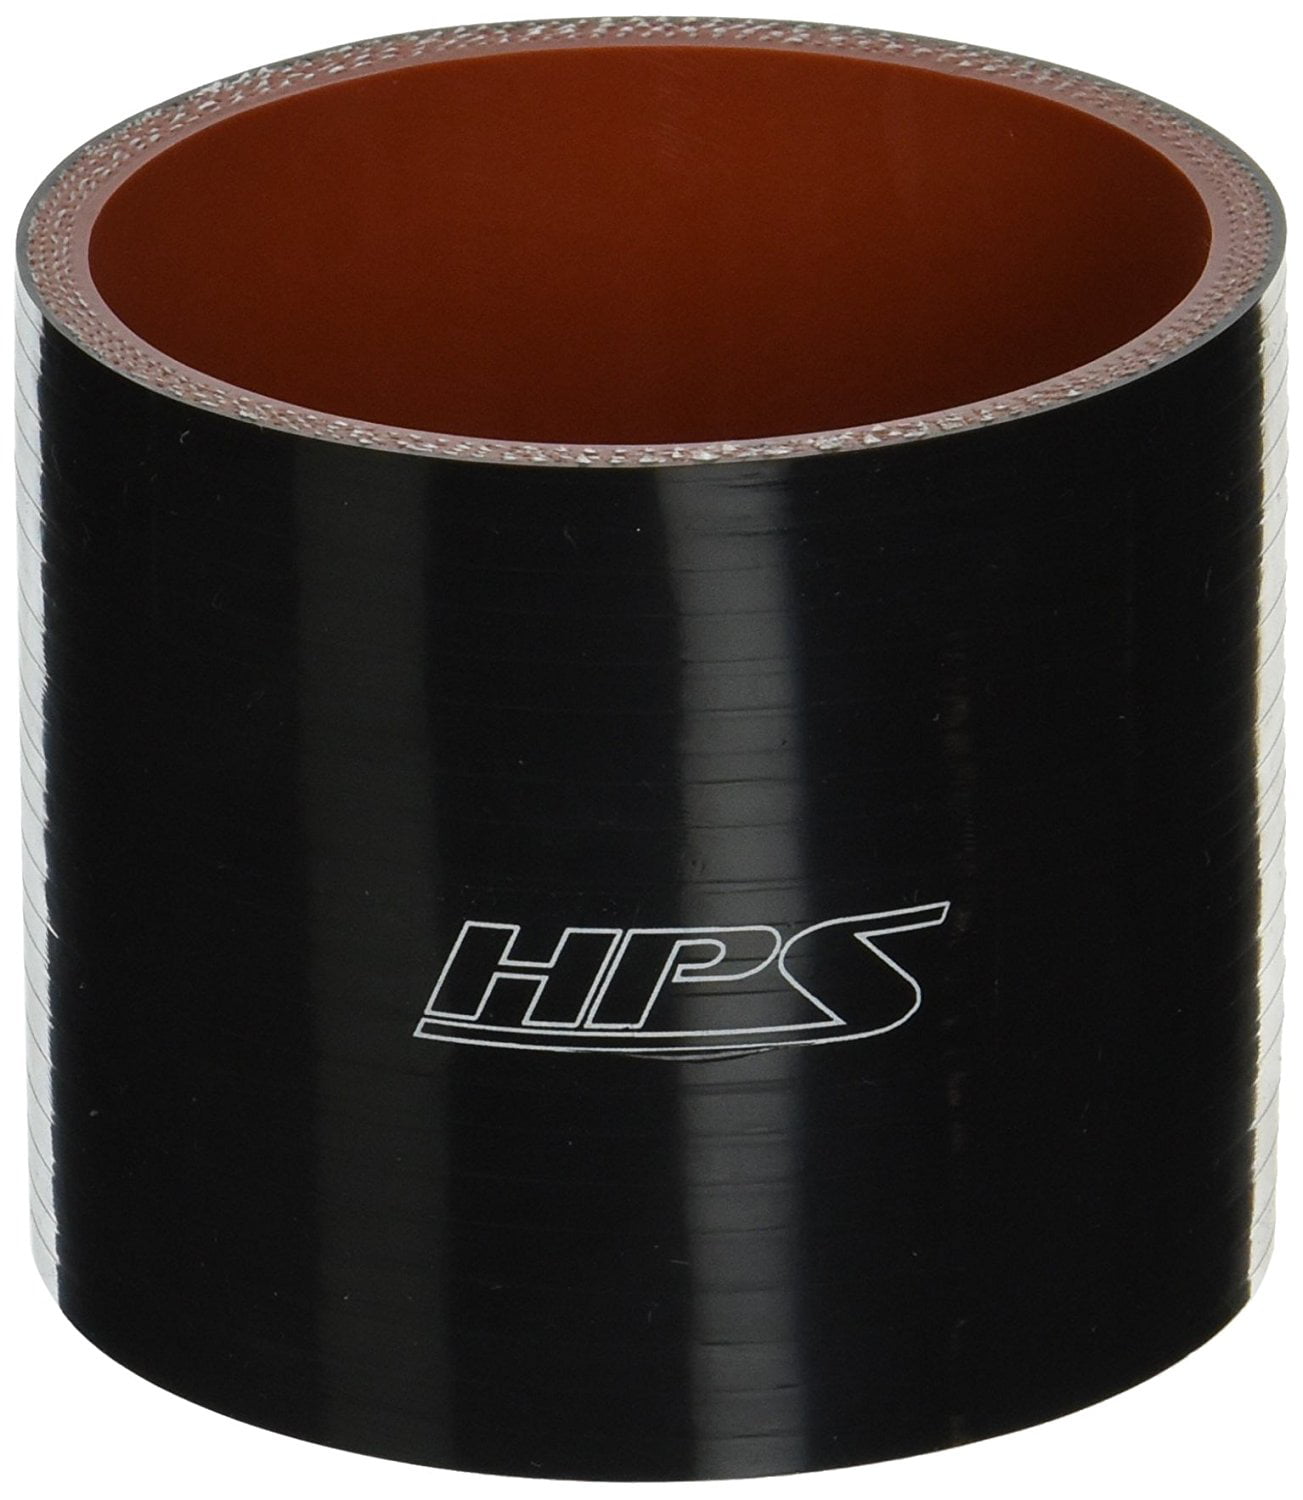 75 PSI Maximum Pressure 3 Length 3.25 ID Black HPS HTSC-325-BLK Silicone High Temperature 4-Ply Reinforced Straight Coupler Hose 